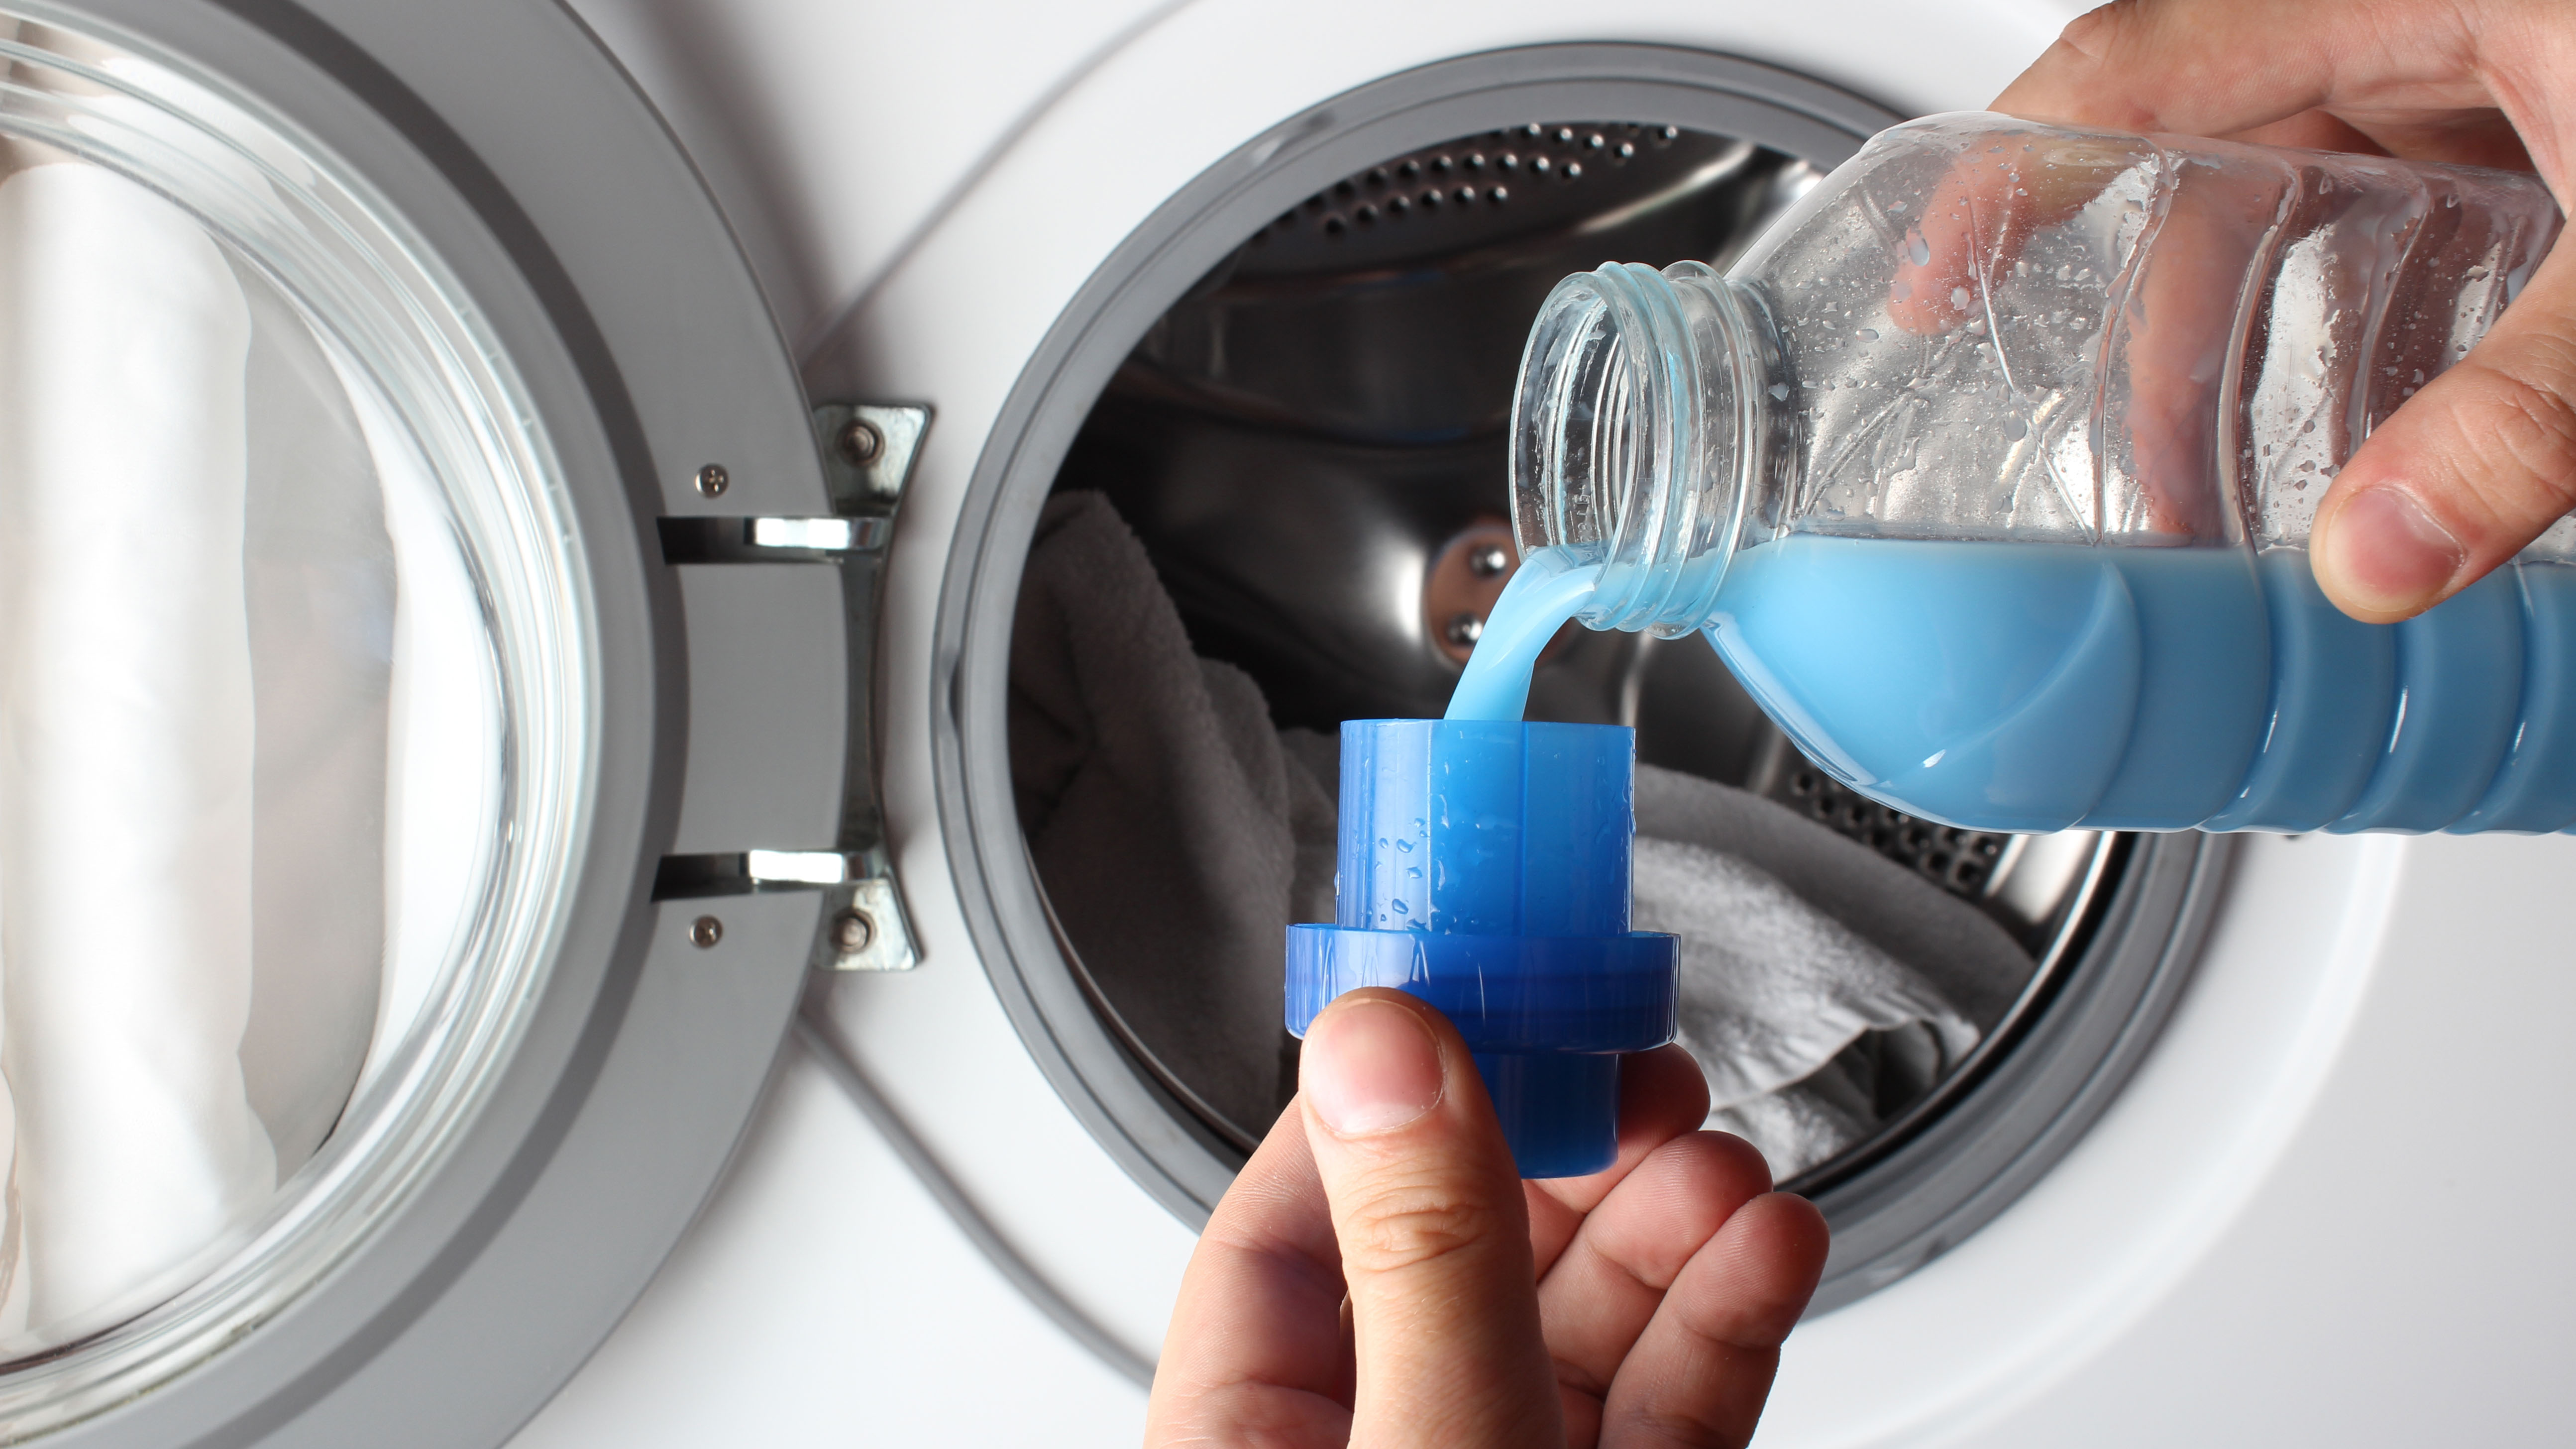 Here’s why fabric softener is bad news for you and your washing machine